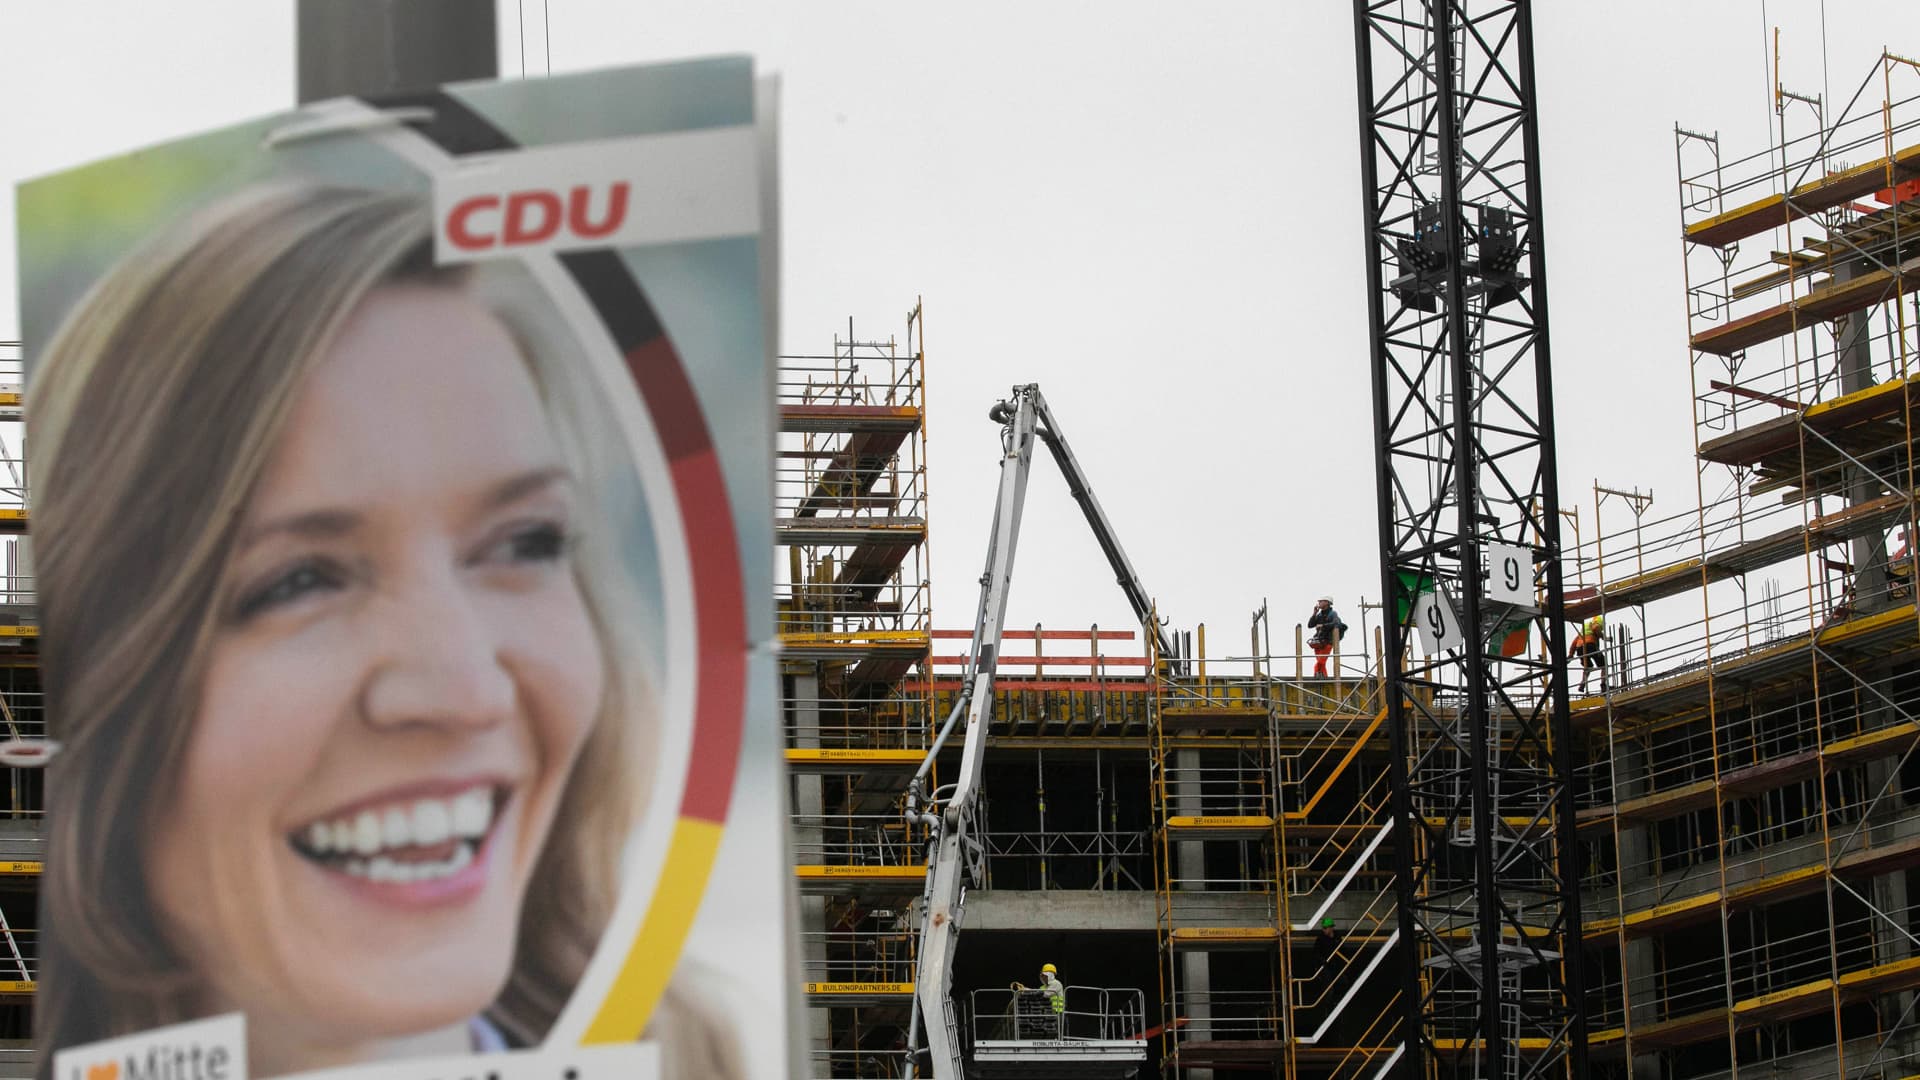 A national election poster for the Christian Democratic Union (CDU) party near a residential apartments construction site in the Mitte district of Berlin in 2021. After years of poor levels of investment in public infrastructure, there's a broad consensus among all political parties that more will be needed in the coming decade.